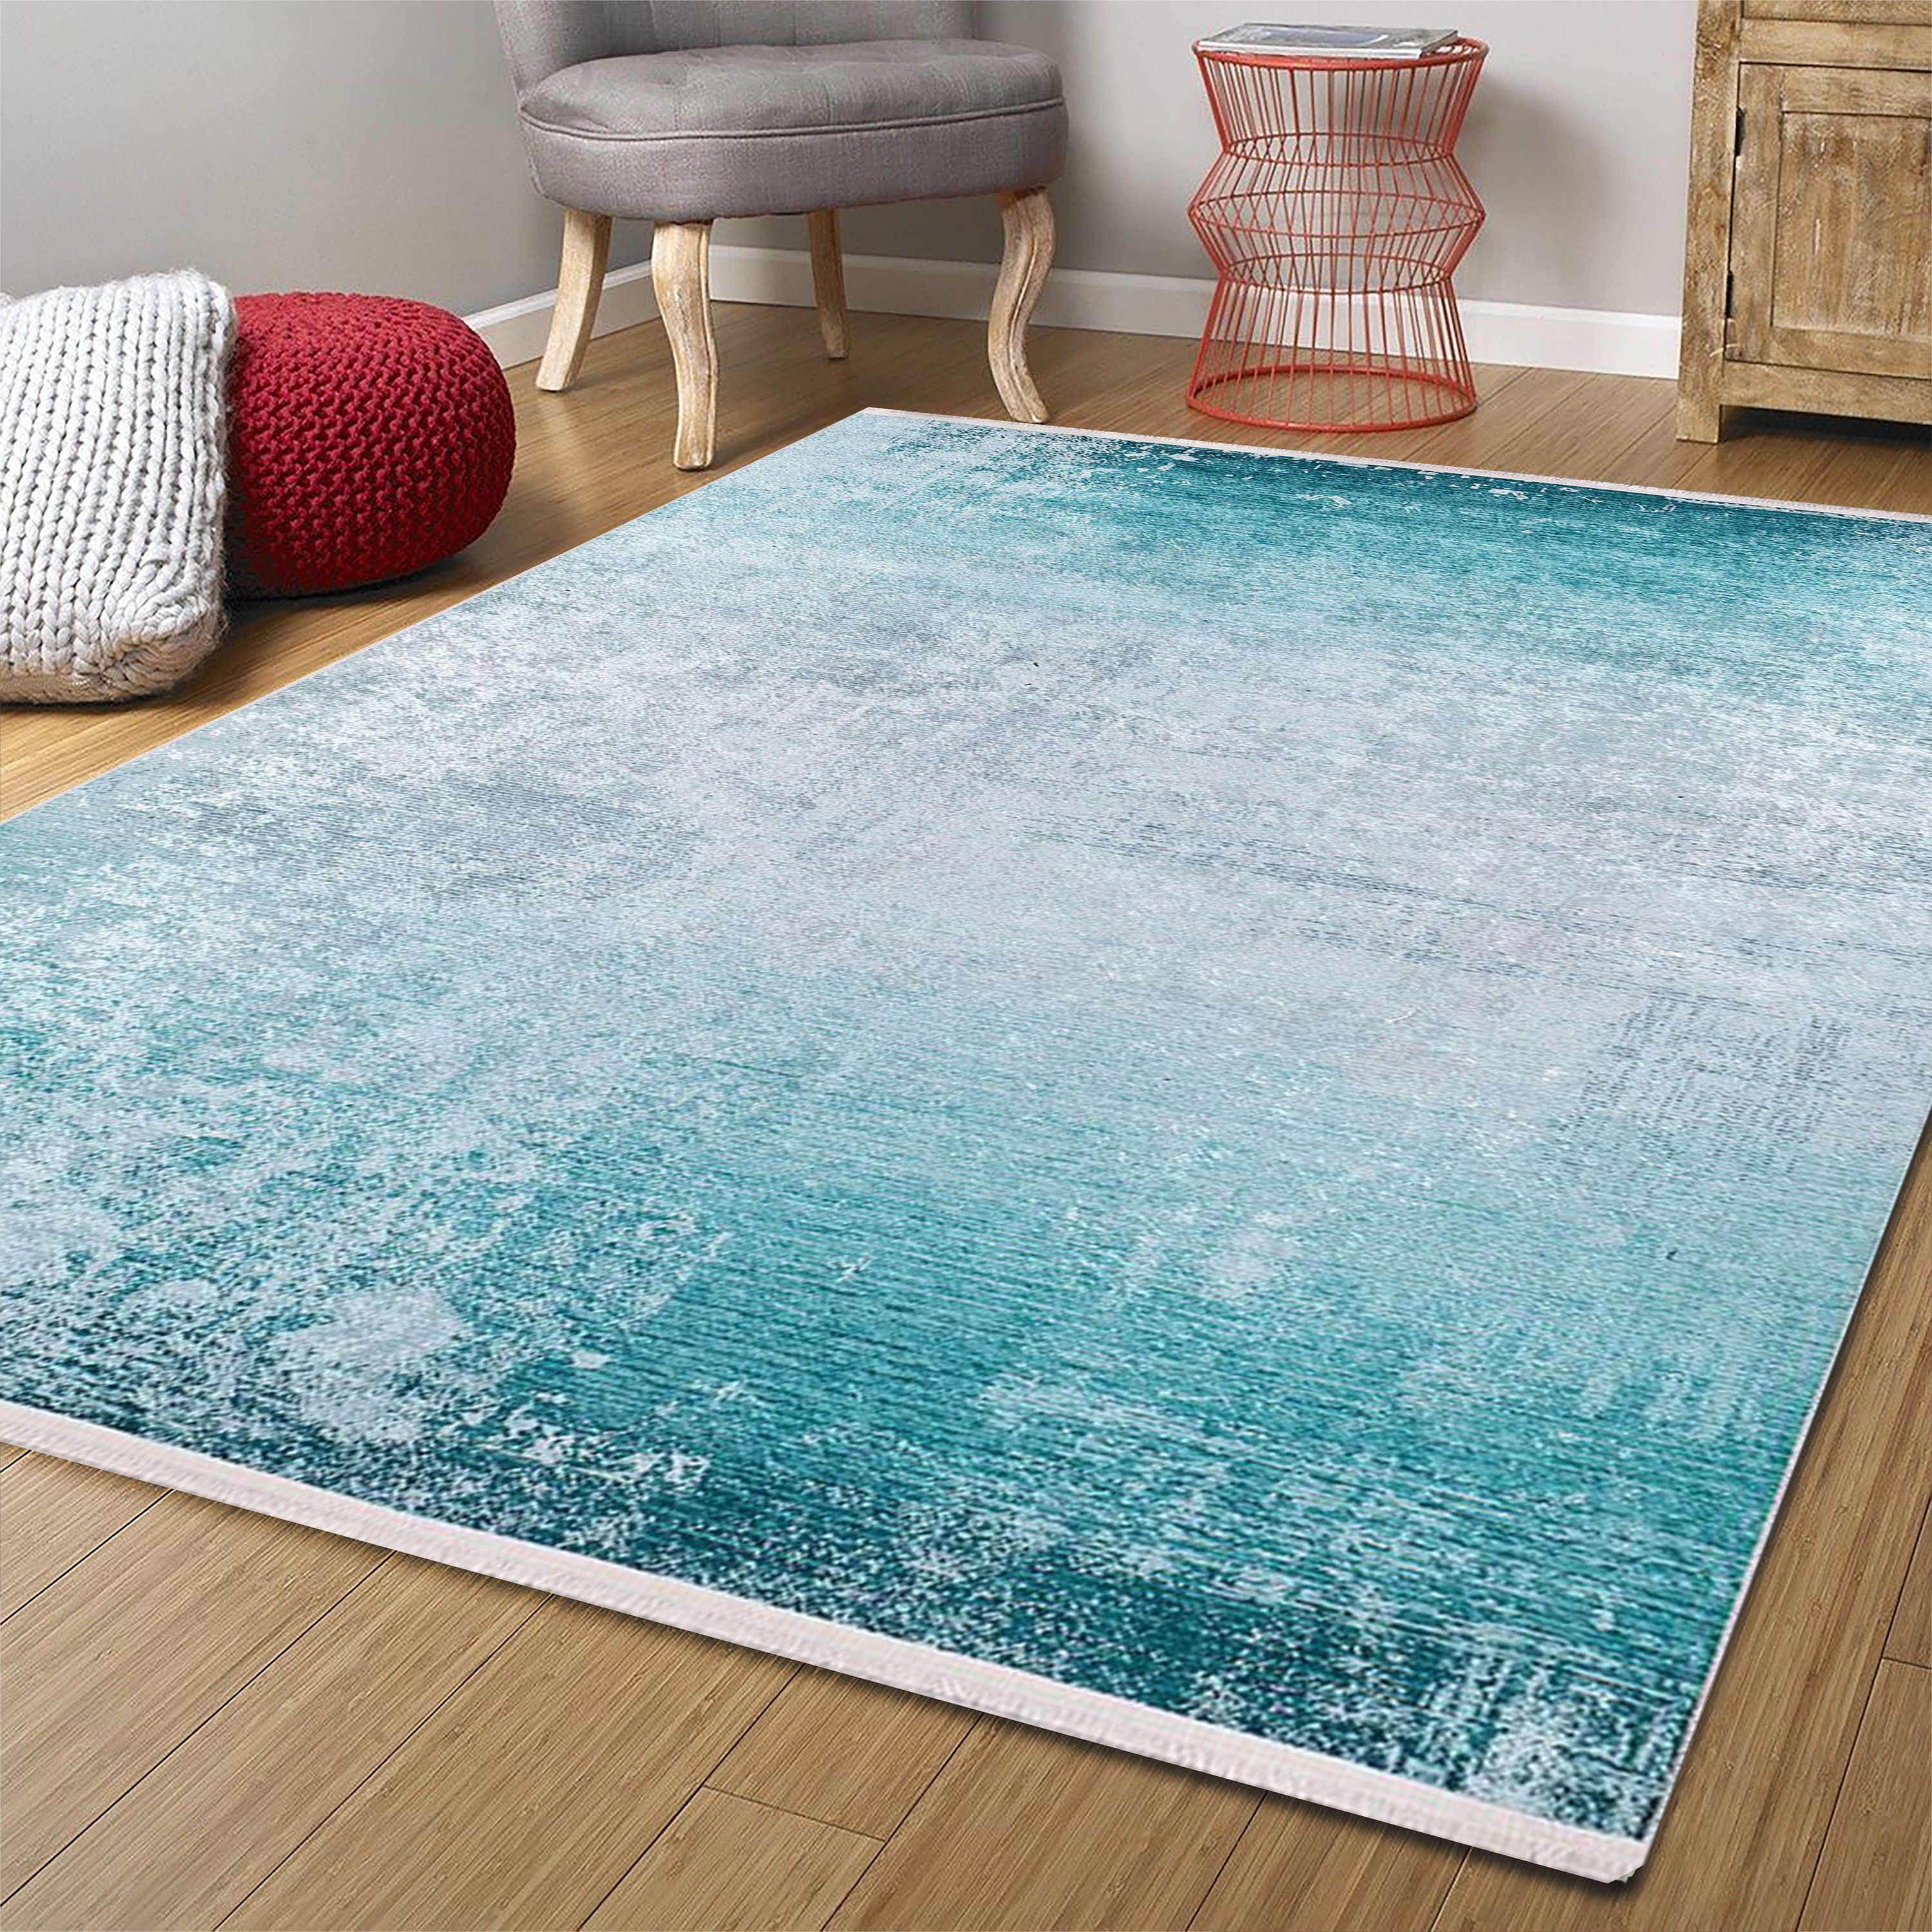 Luxury Turquoise Rug Beach Aqua Ocean Abstract Oversized Area – Etsy Denmark Throughout Turquoise Rugs (View 8 of 15)